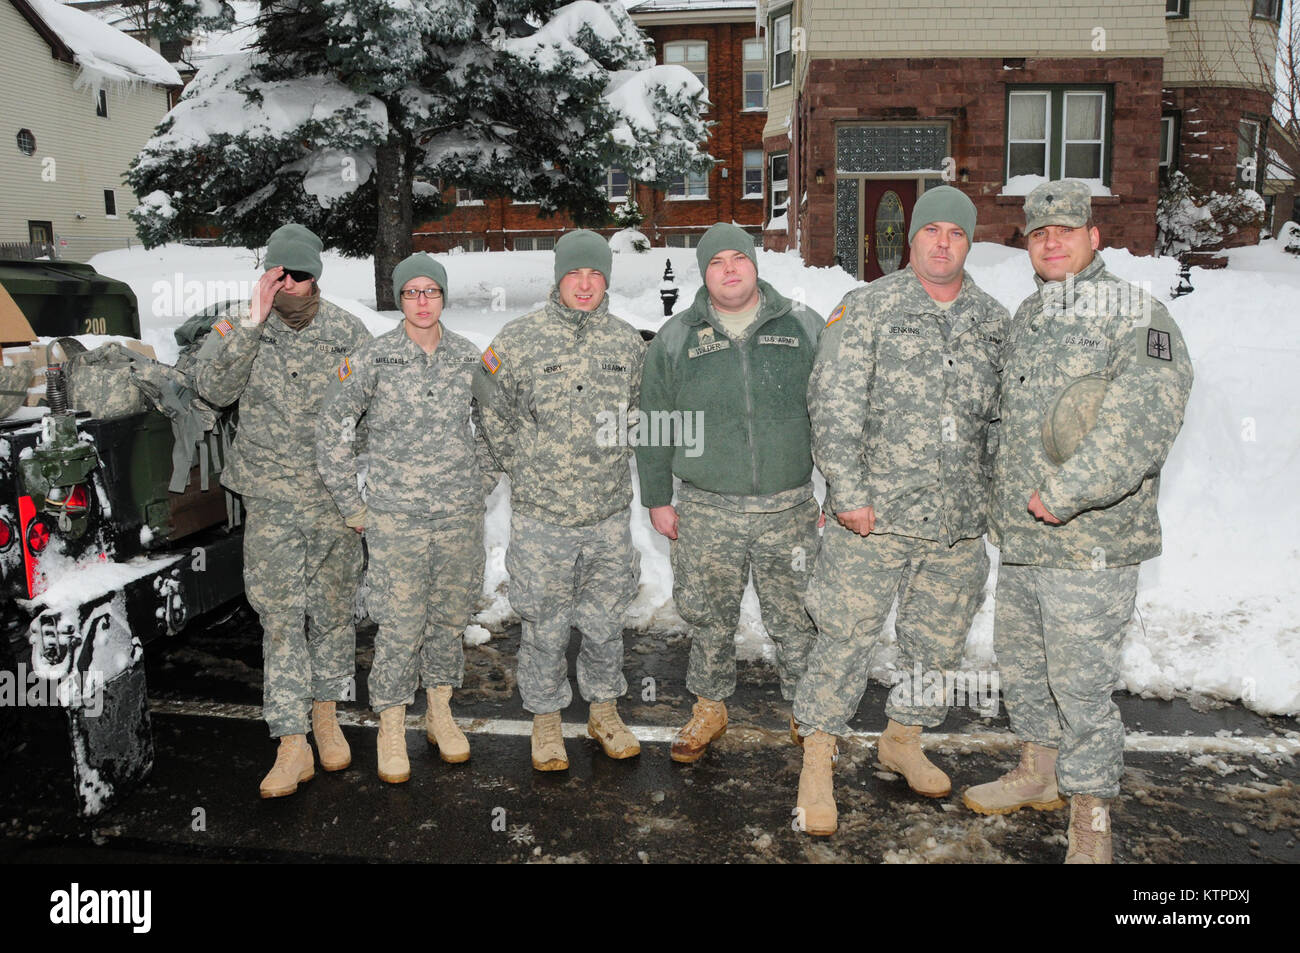 New York Army National Guard Soldiers from the 152nd Engineer Company use engineering equipment to assist in snow removal efforts in West Seneca, N.Y., just east of Buffalo November 20 as part of Governor Andrew Cuomo’s callup of some 375 National Guard members to support response and recovery efforts in Western New York following historic amounts of snowfall. Some two dozen engineers, based in Buffalo, utilized bucket loaders and dump trucks to clear key roadways for emergency responders at this one site, part of ongoing efforts with more than a dozen missions completed in the first 48 hours. Stock Photo